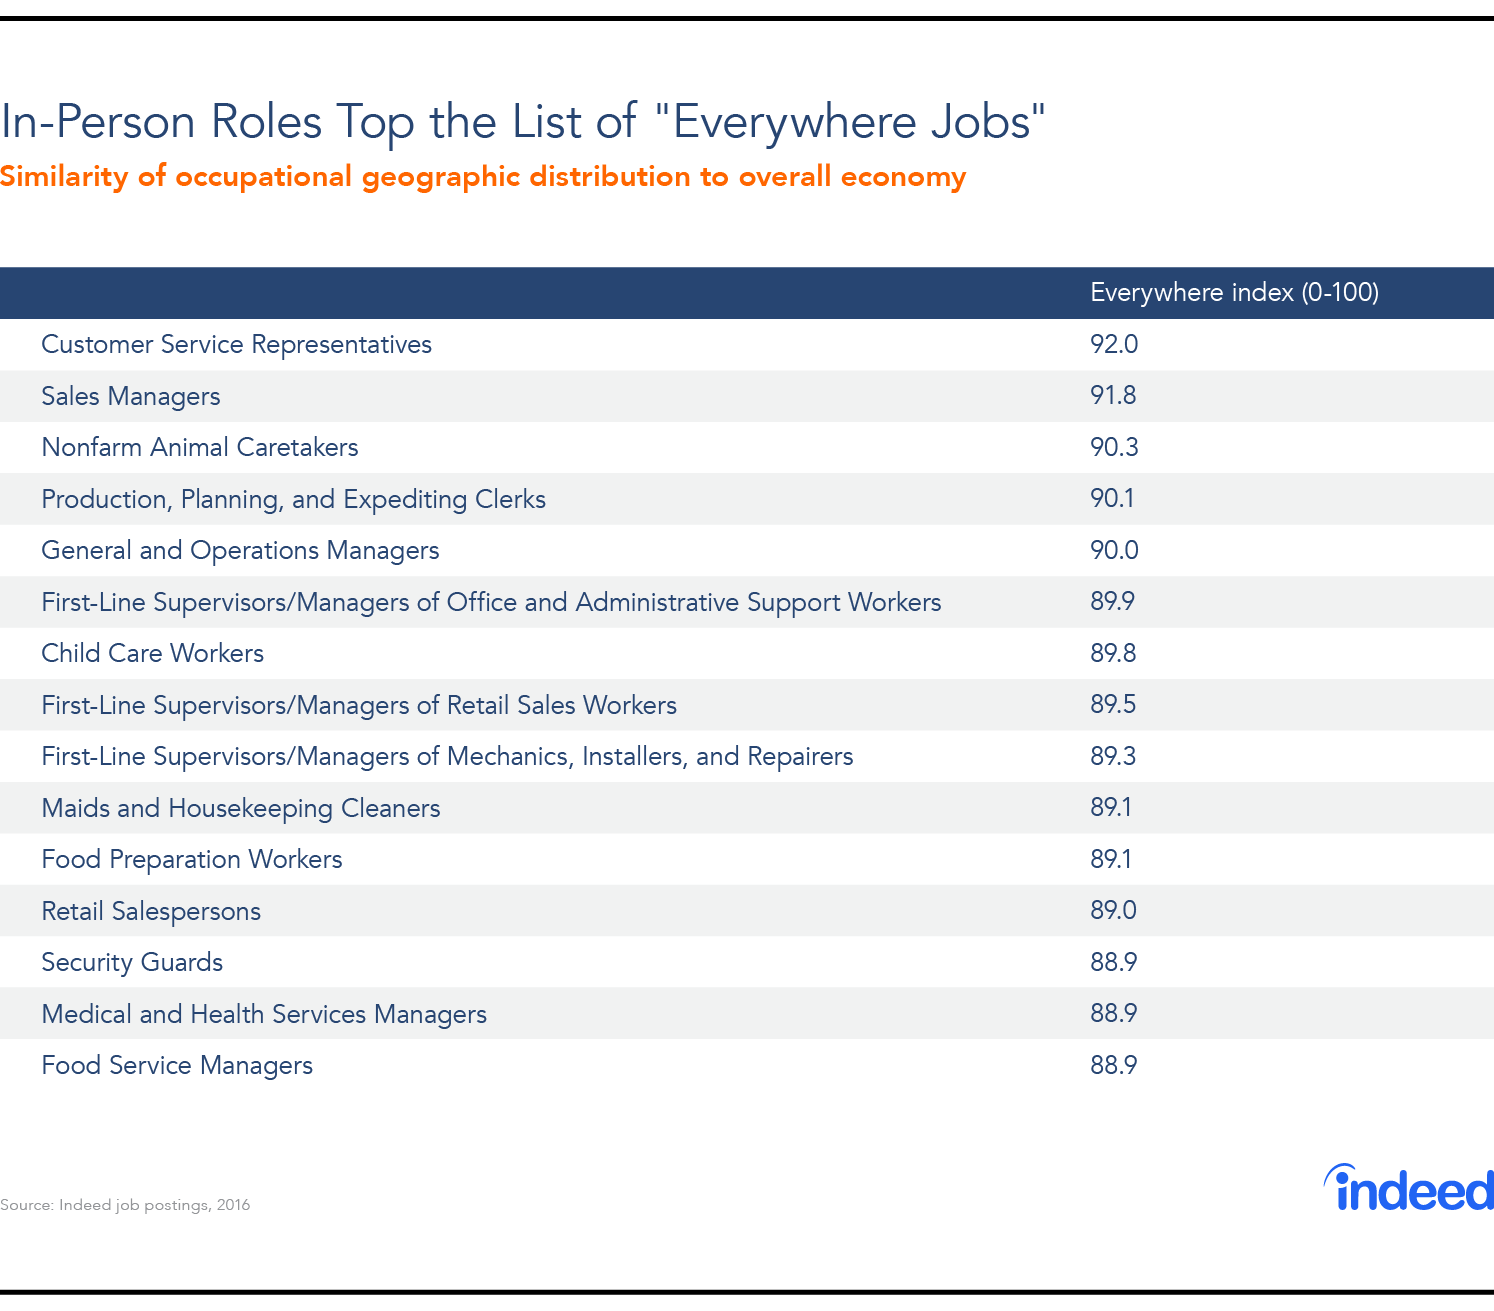 In-person roles top the list of "everywhere jobs"